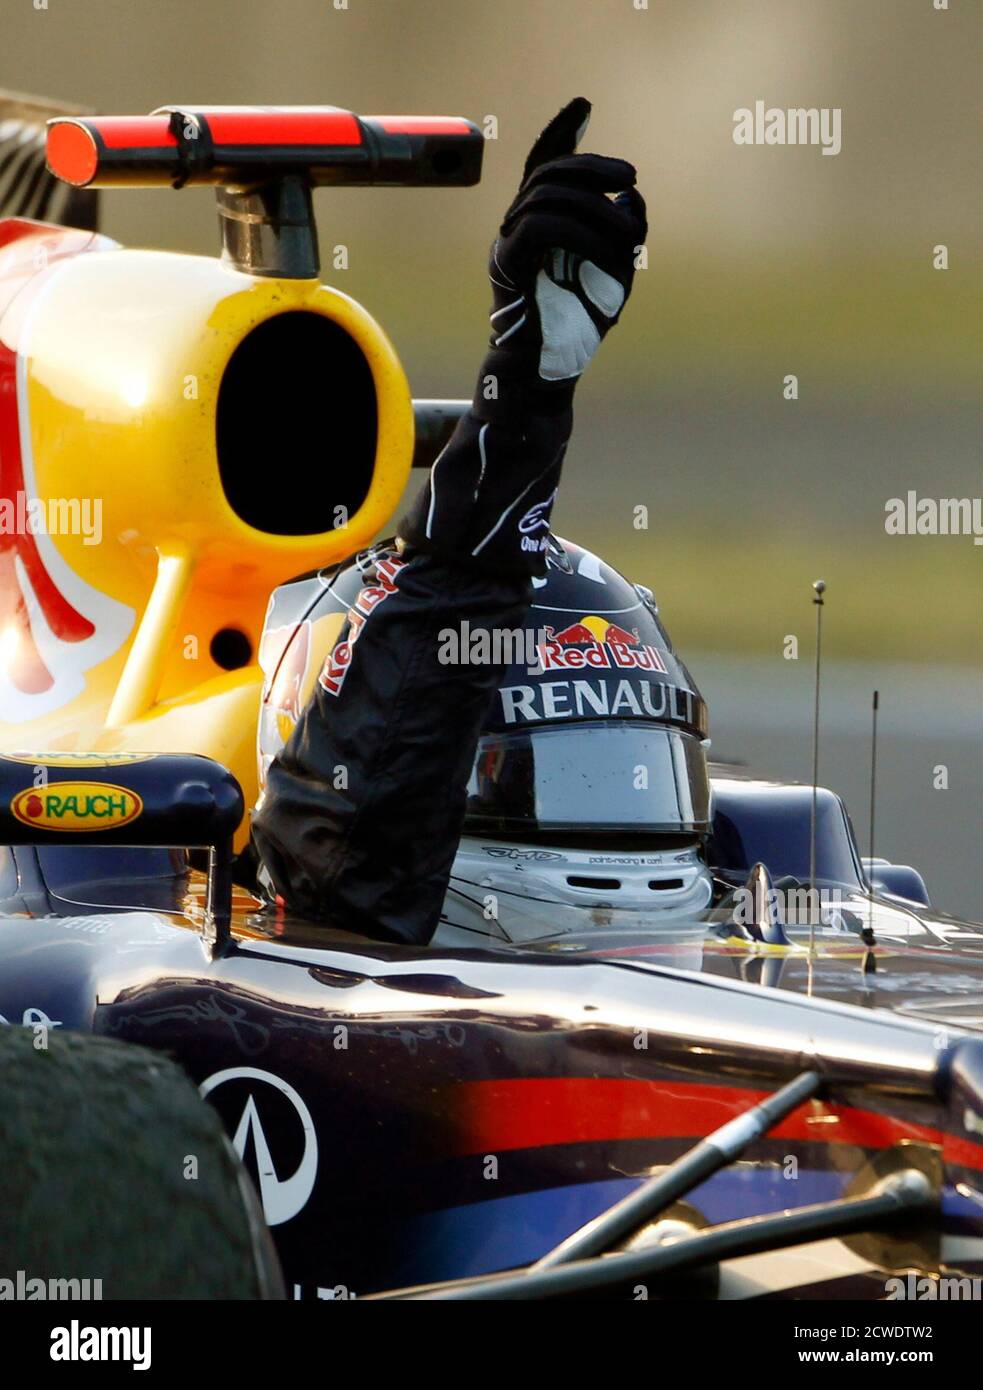 Red Bull Formula One driver Sebastian Vettel of Germany celebrates winning  the world championship after finishing third in the Japanese F1 Grand Prix  at the Suzuka circuit October 9, 2011. Vettel became